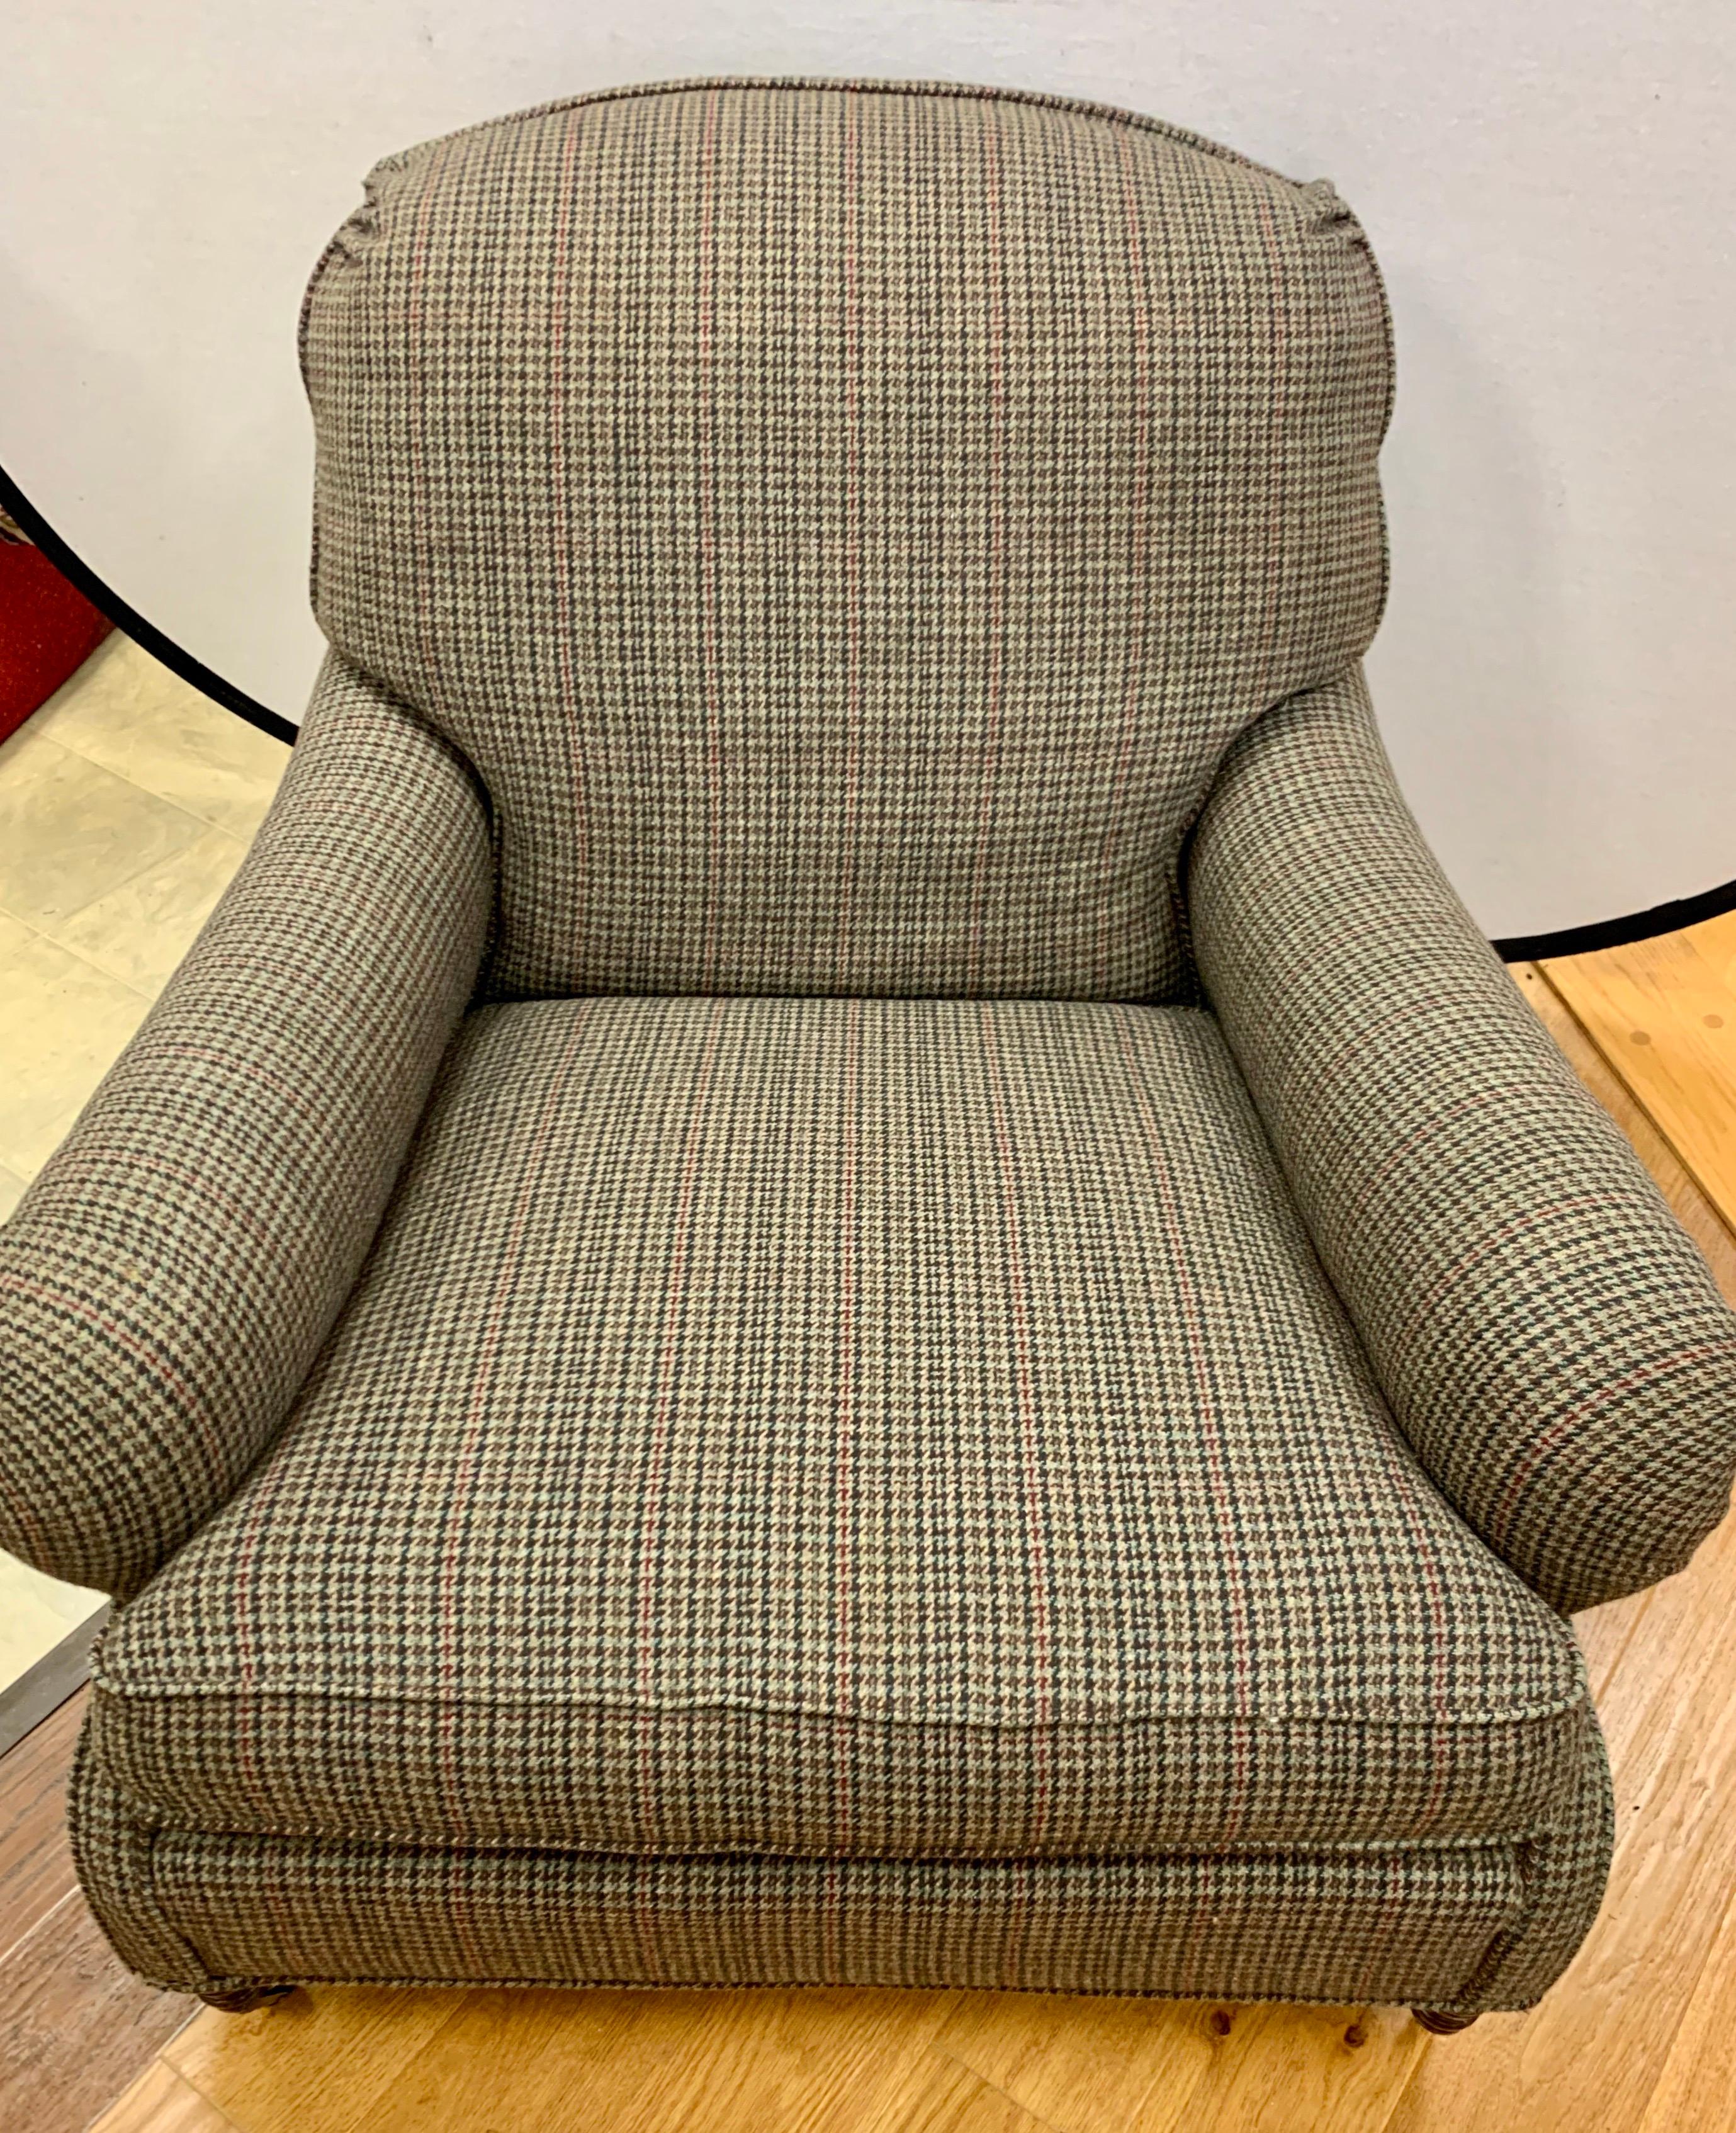 Vintage Ralph Lauren blue label reading chair on caster wheels. Classic RL brown tweed fabric which is original. Four caster wheels for ease of movement, circa 1980s. Features 8-way hand tied construction.
All RL hallmarks present.